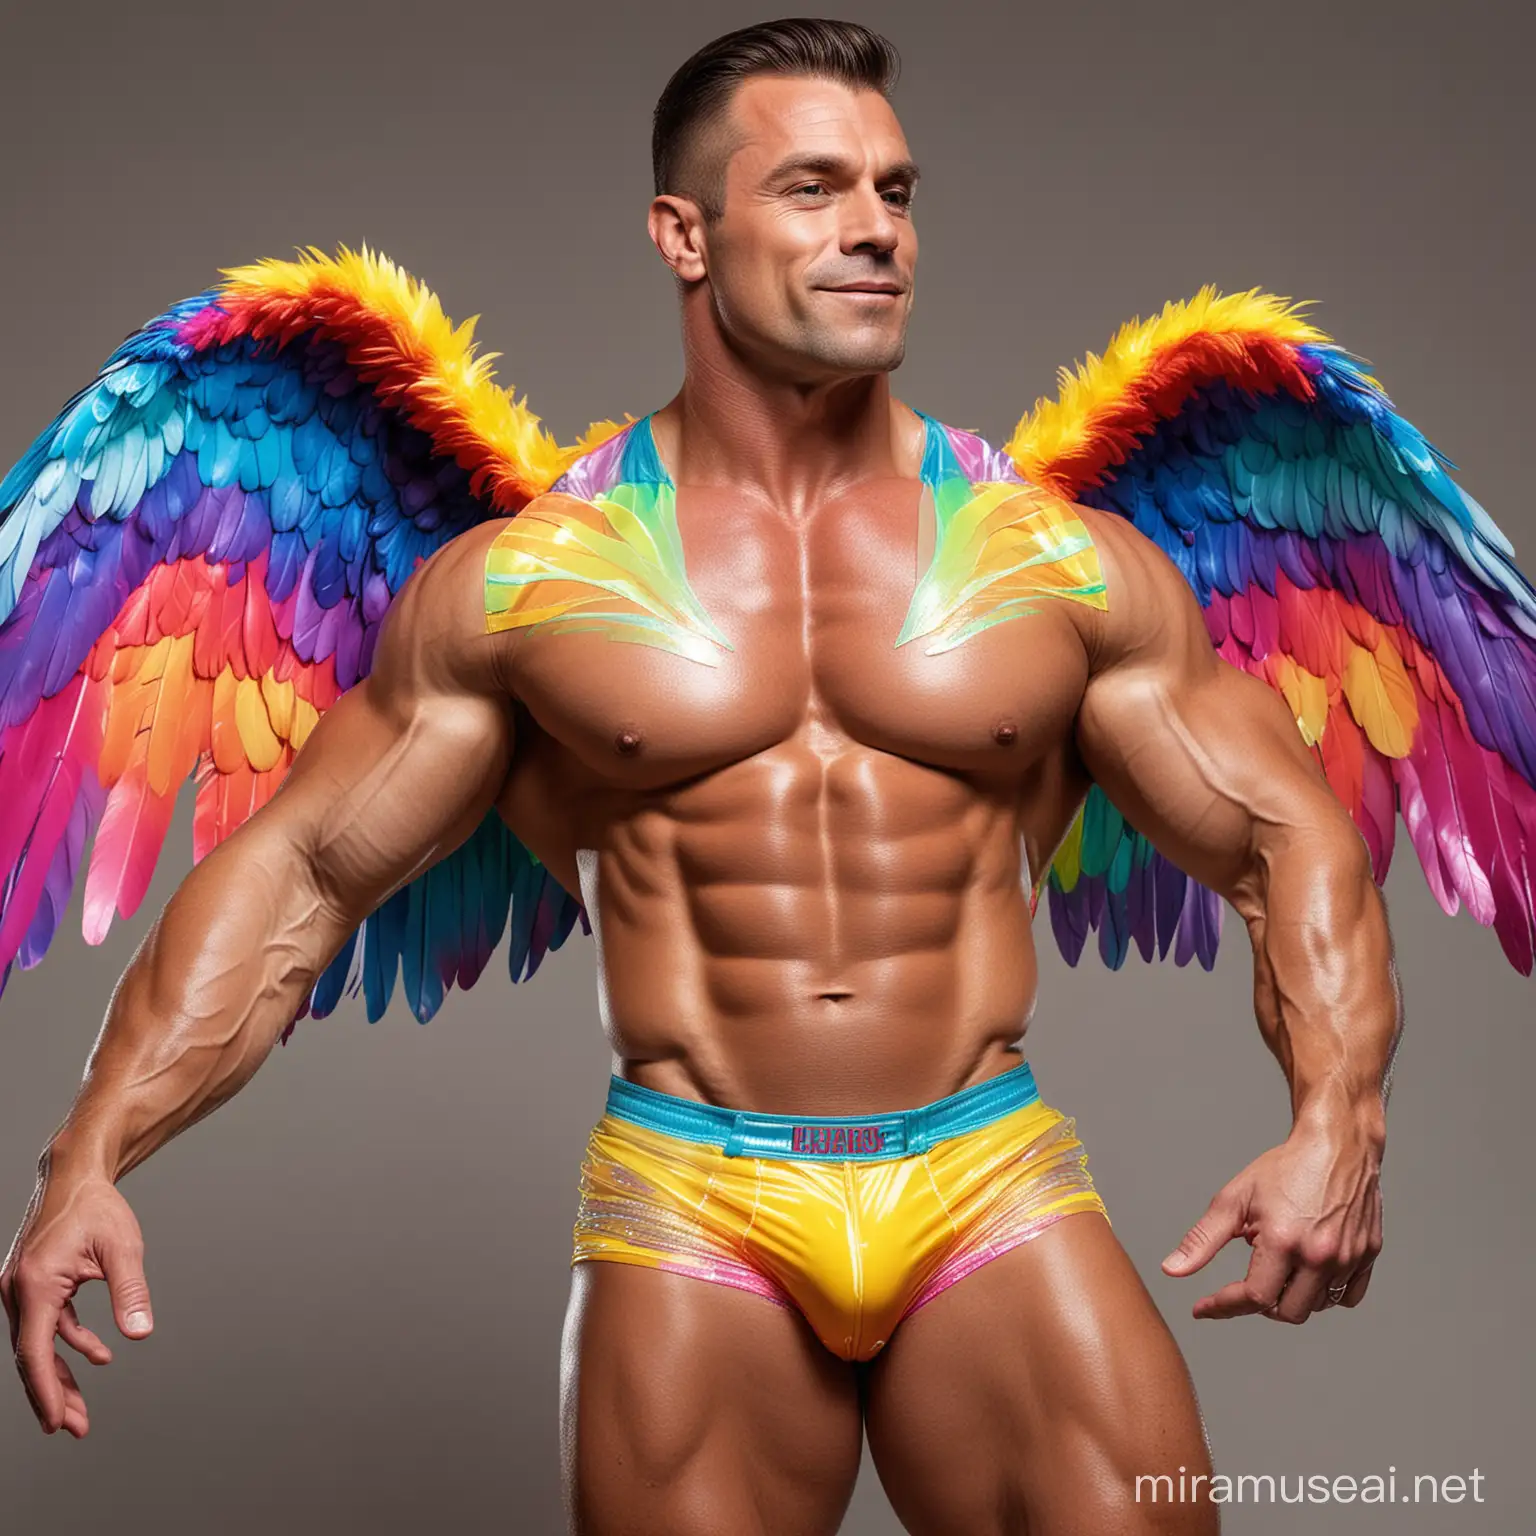 Ultra Beefy IFBB Bodybuilder Flexing in Bright Rainbow Coloured Eagle Wings Jacket